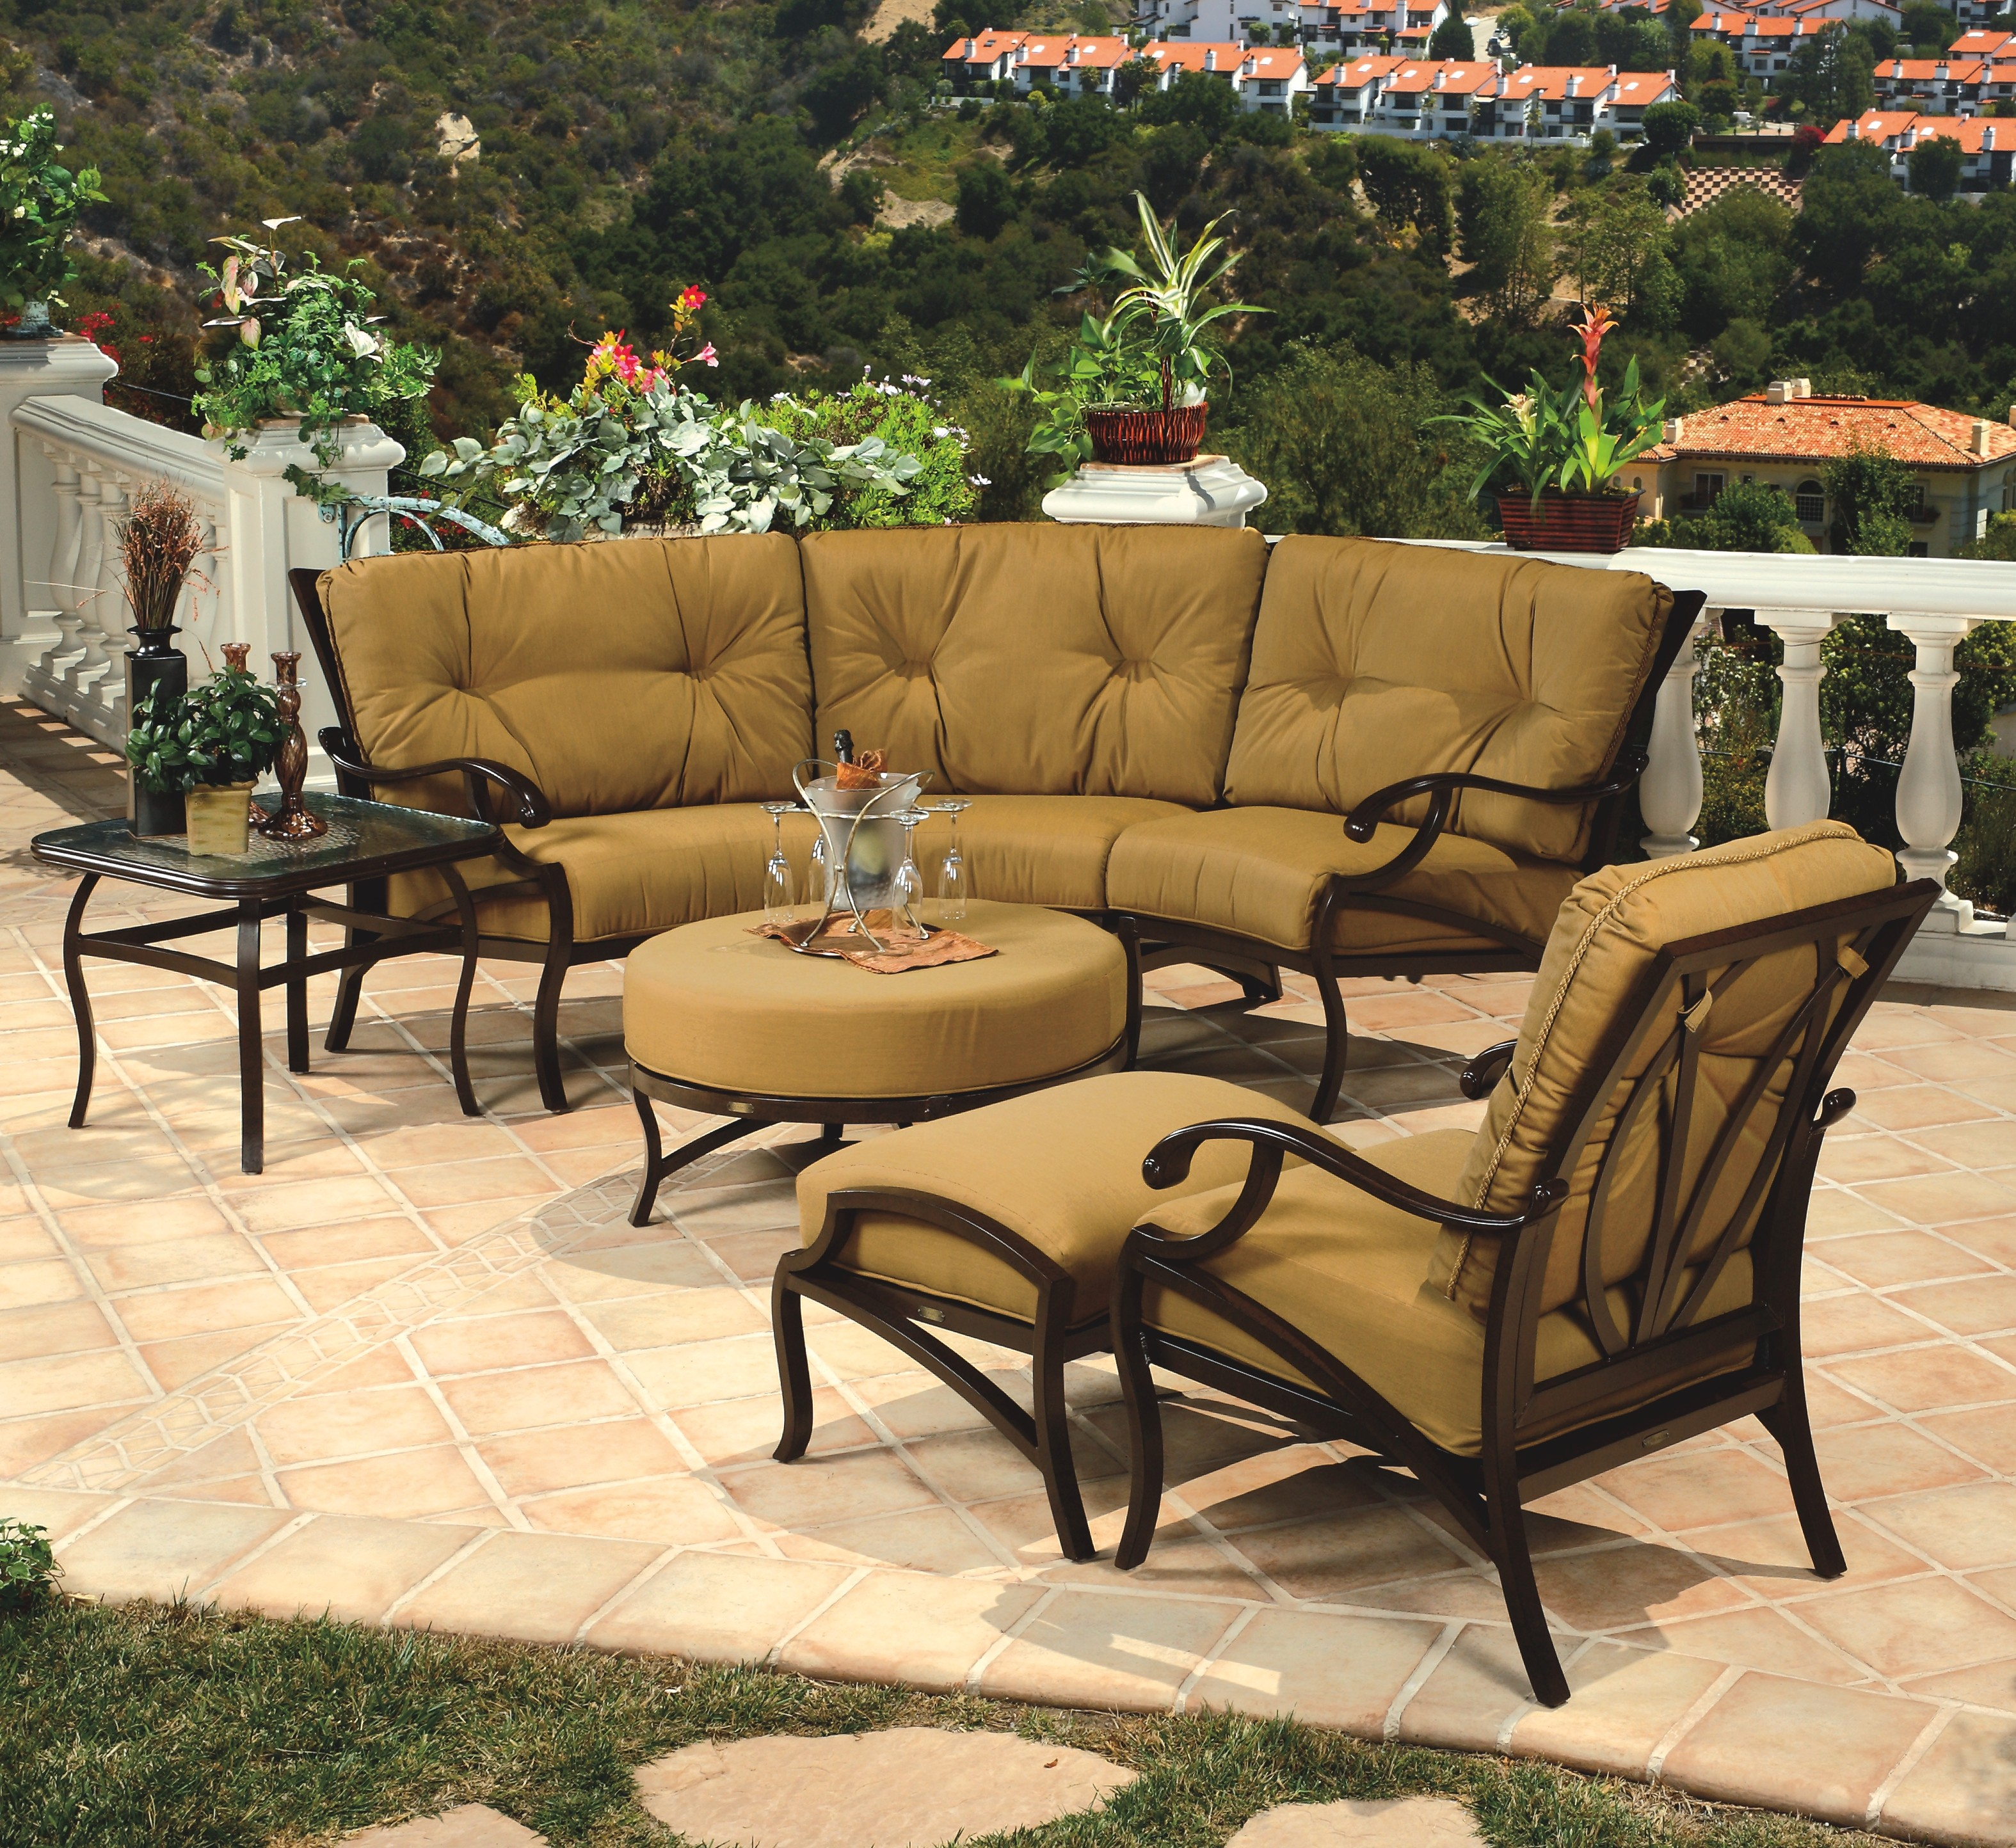 Wegmans Outdoor Patio Furniture Furniture Gallery Image And Wallpaper in sizing 3150 X 2888